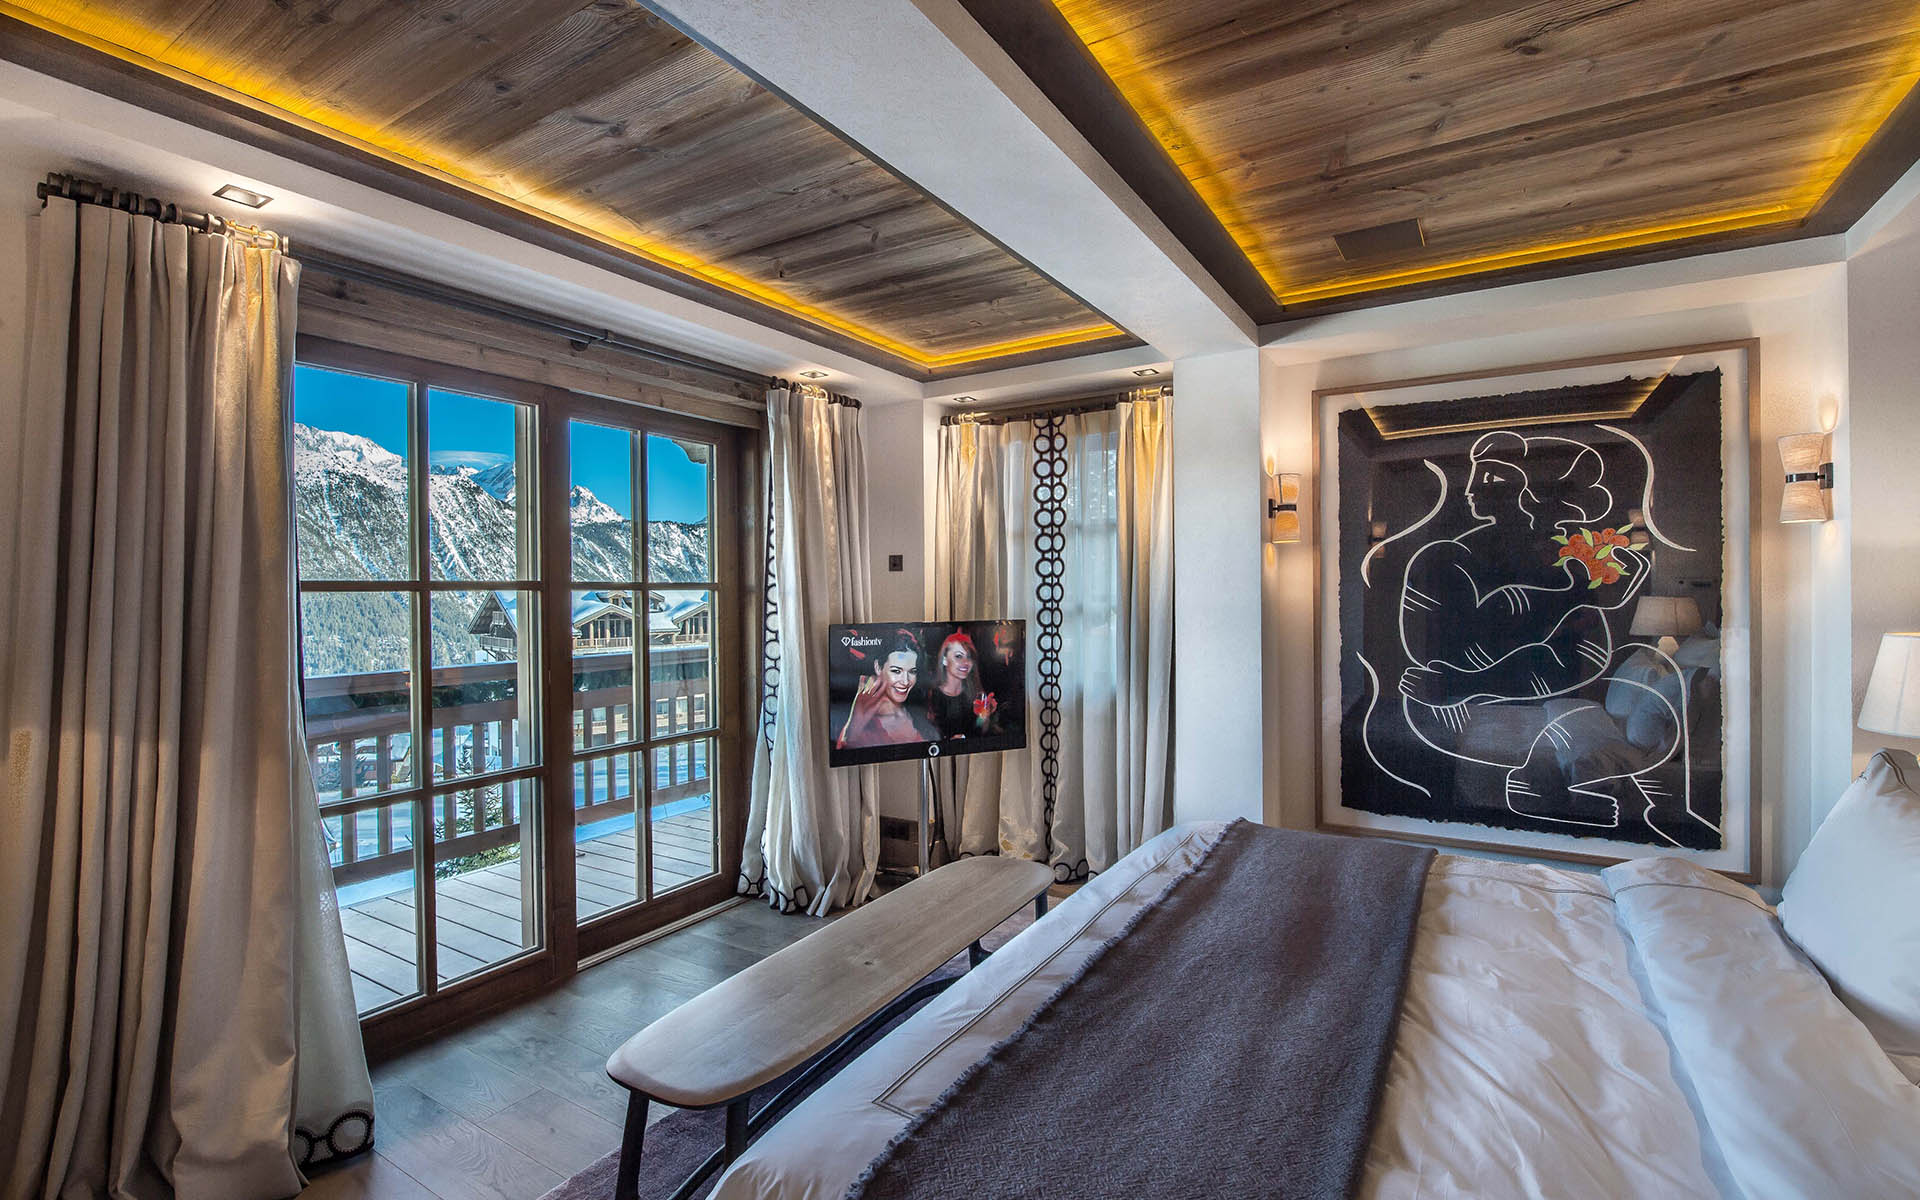 Chalet Cryst’Aile, Courchevel 1850